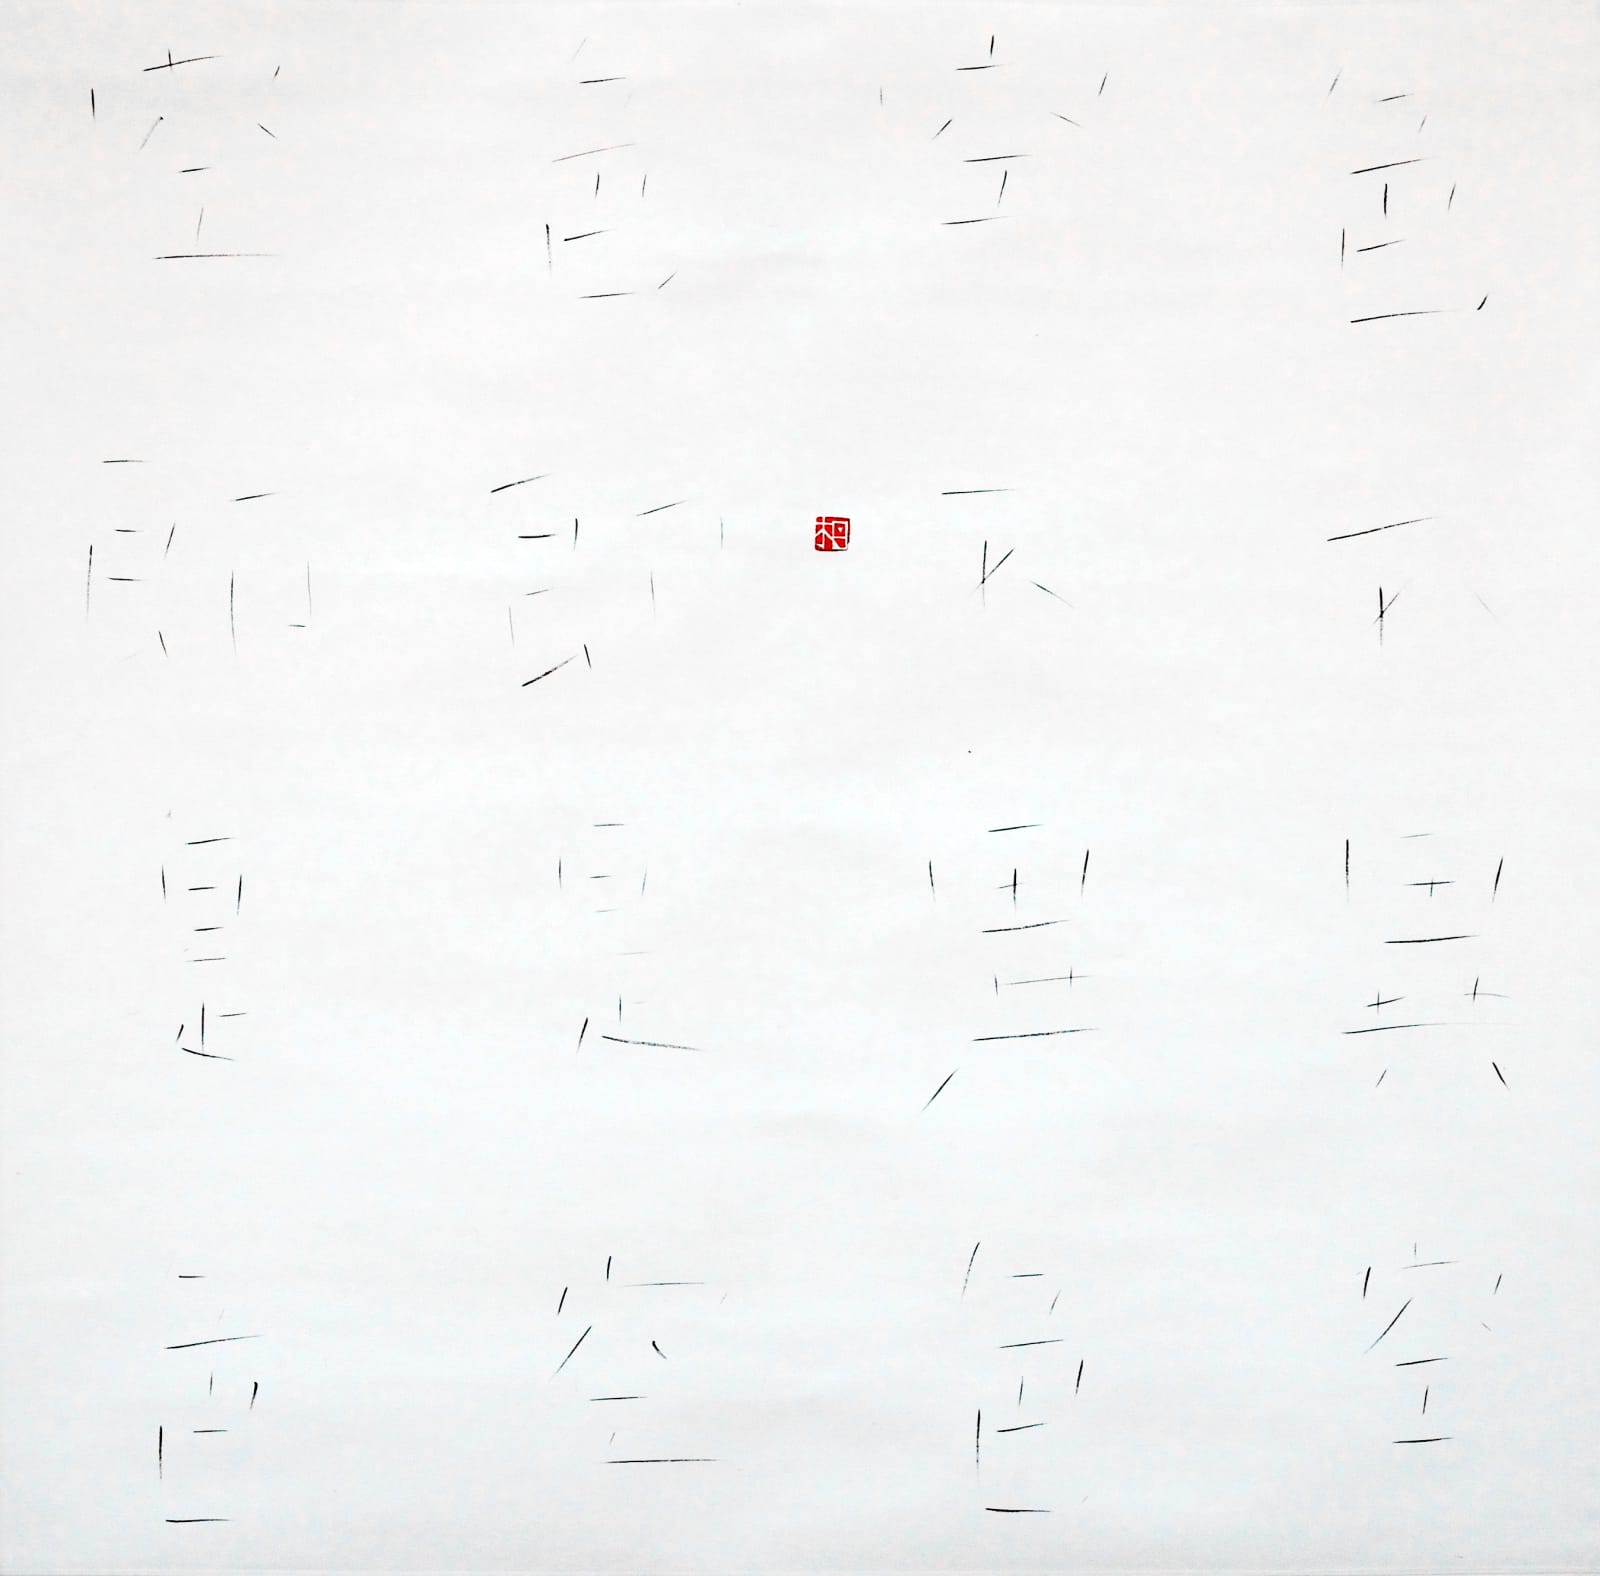 Fung Ming Chip 馮明秋, Scatter Script, Heart Sutra 散字心經, 2010